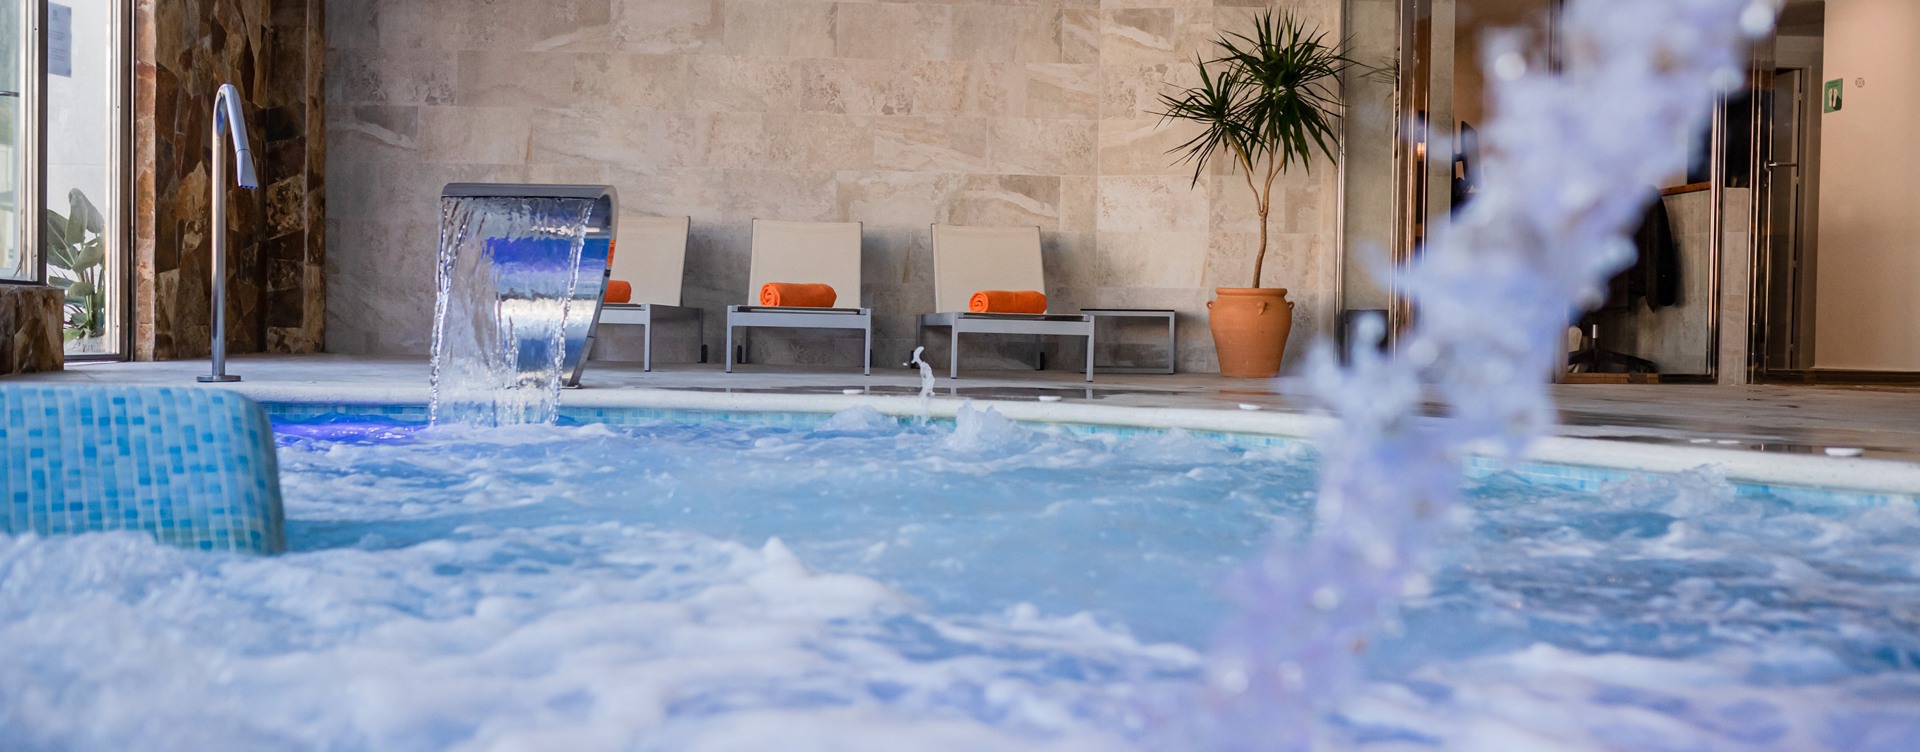 Enjoy the fitness and wellness facilities
at our resort on the Costa Blanca